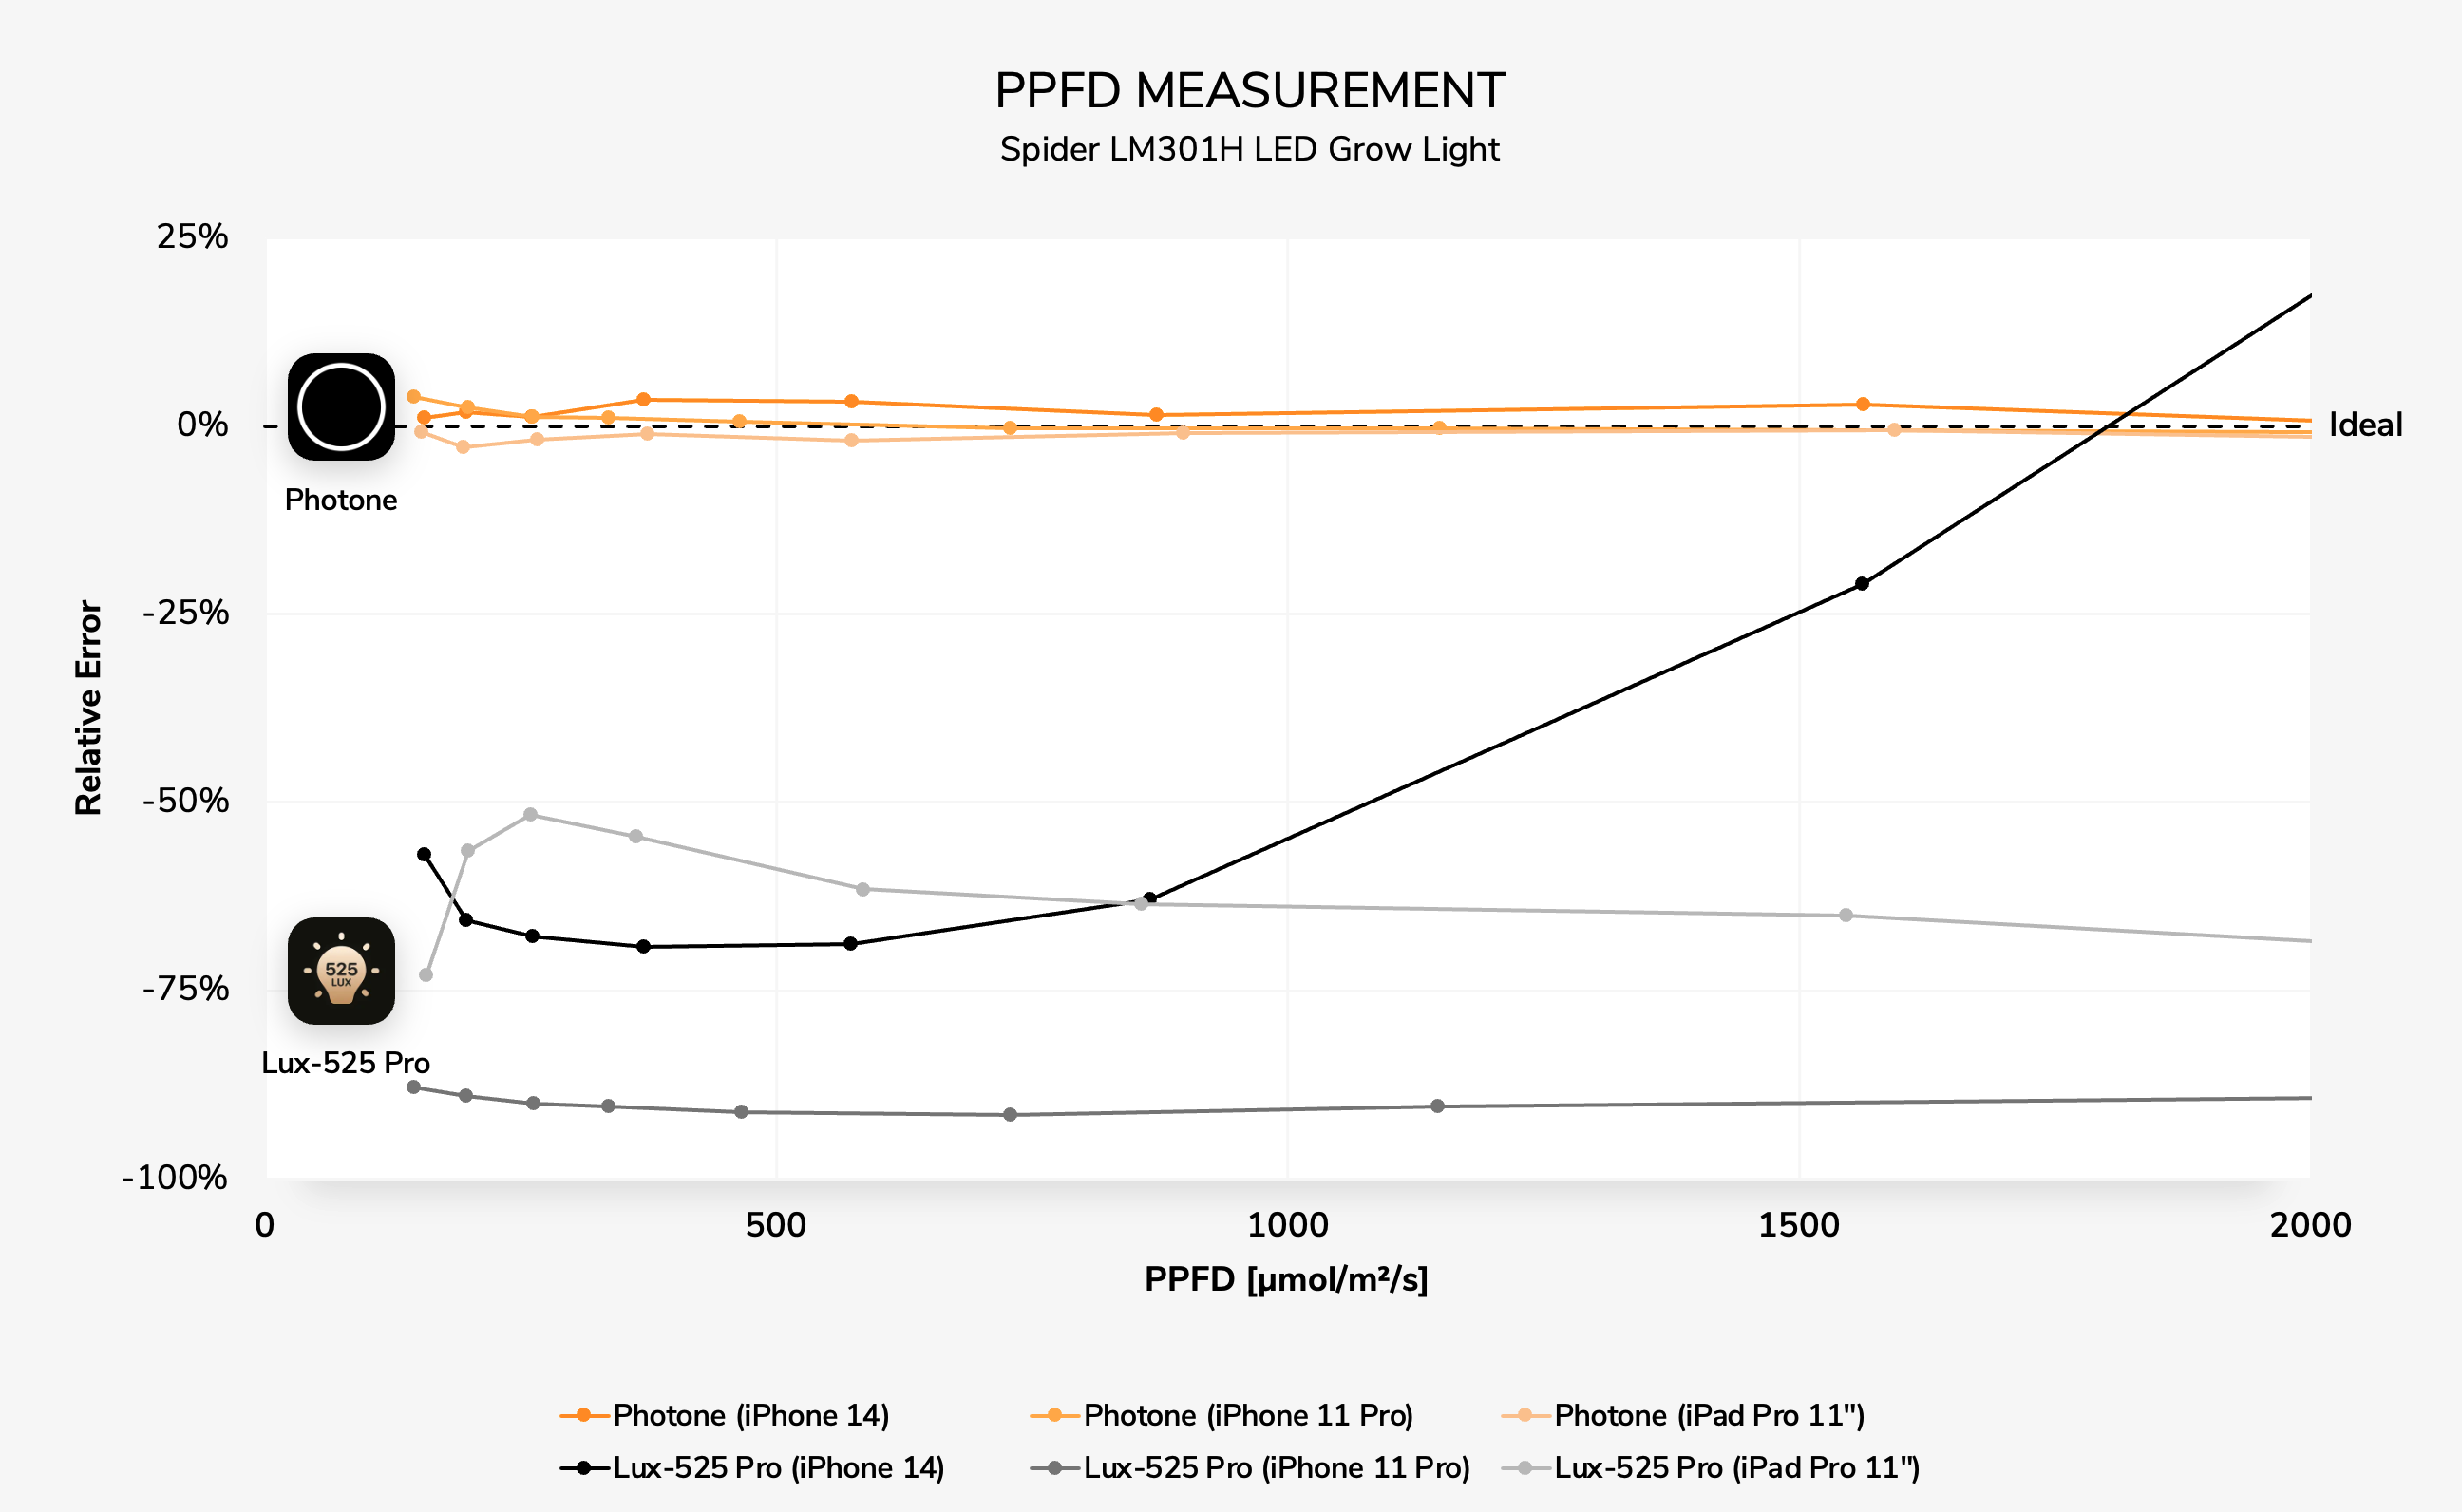 The Photone app is a very accurate PPFD meter app for full spectrum LED plant grow lights